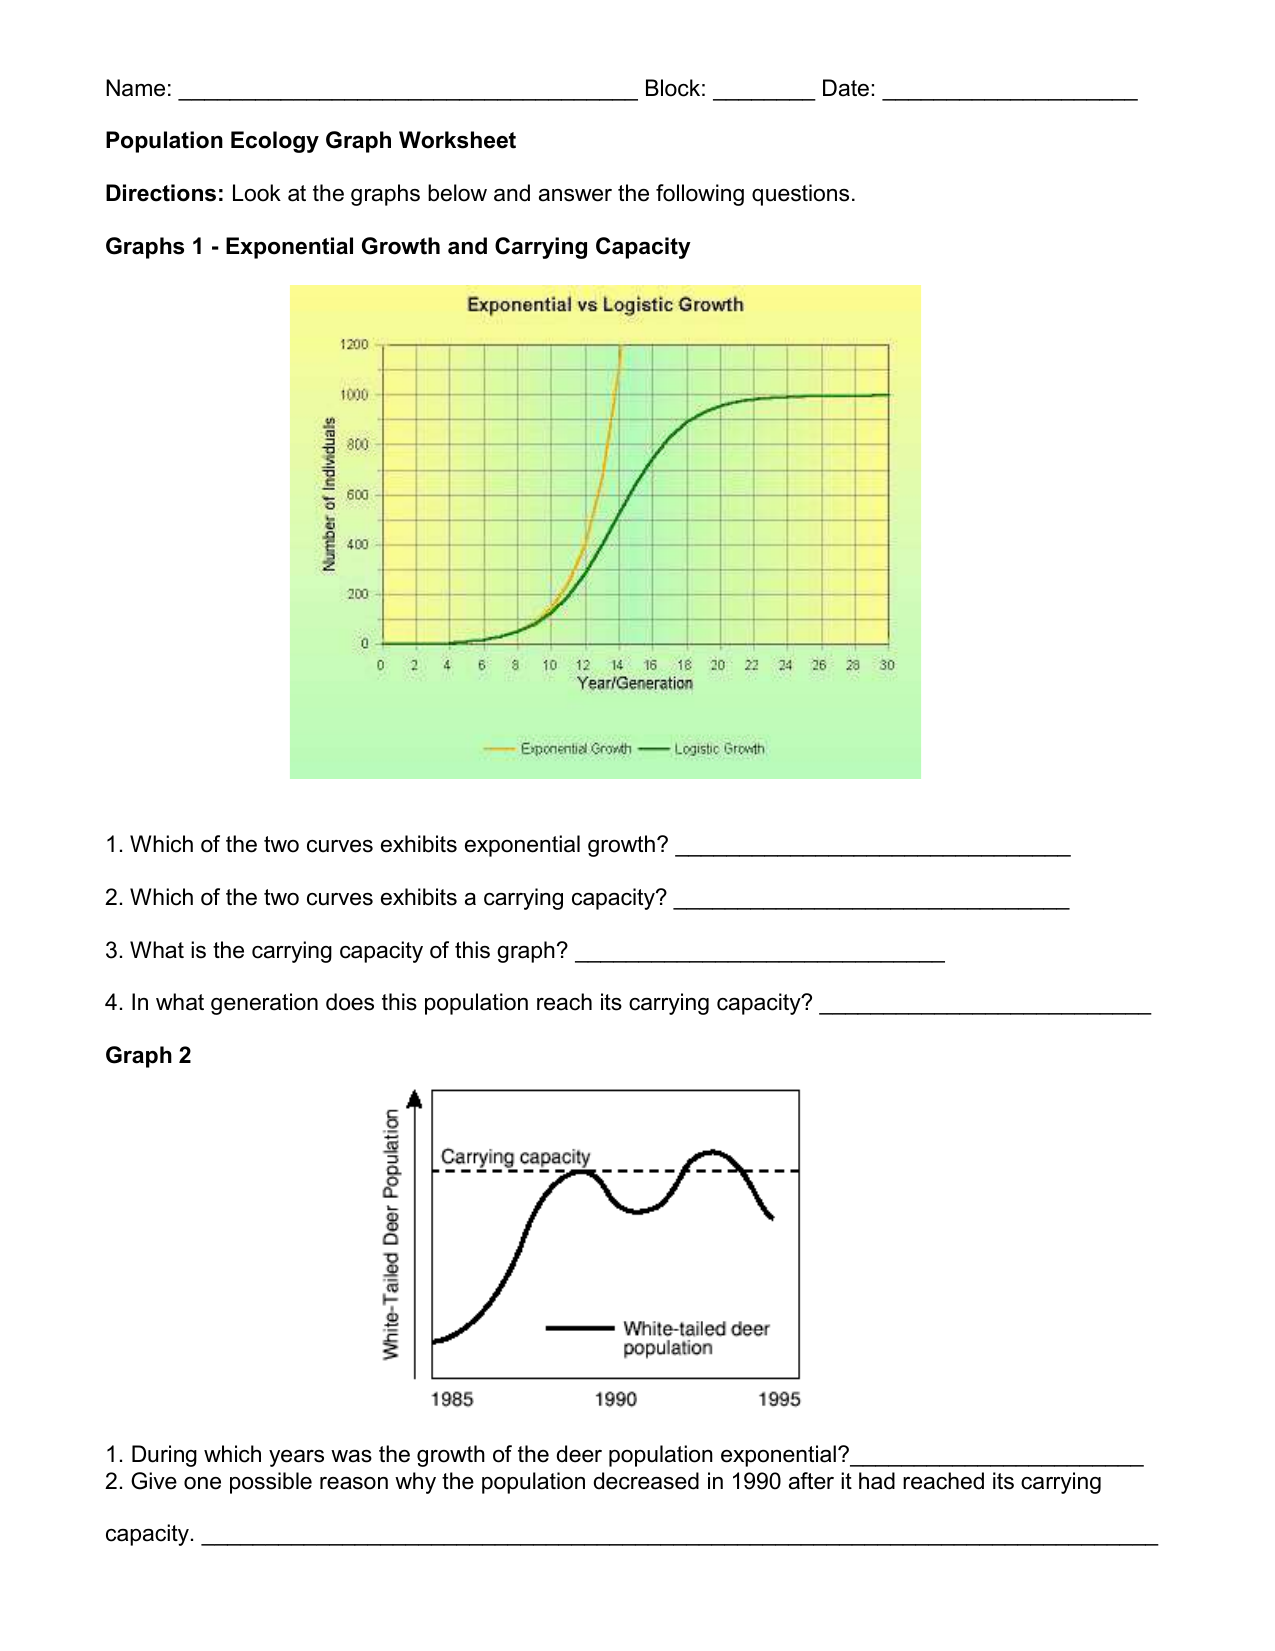 Population Ecology Graph Worksheet Within Population Ecology Graphs Worksheet Answers